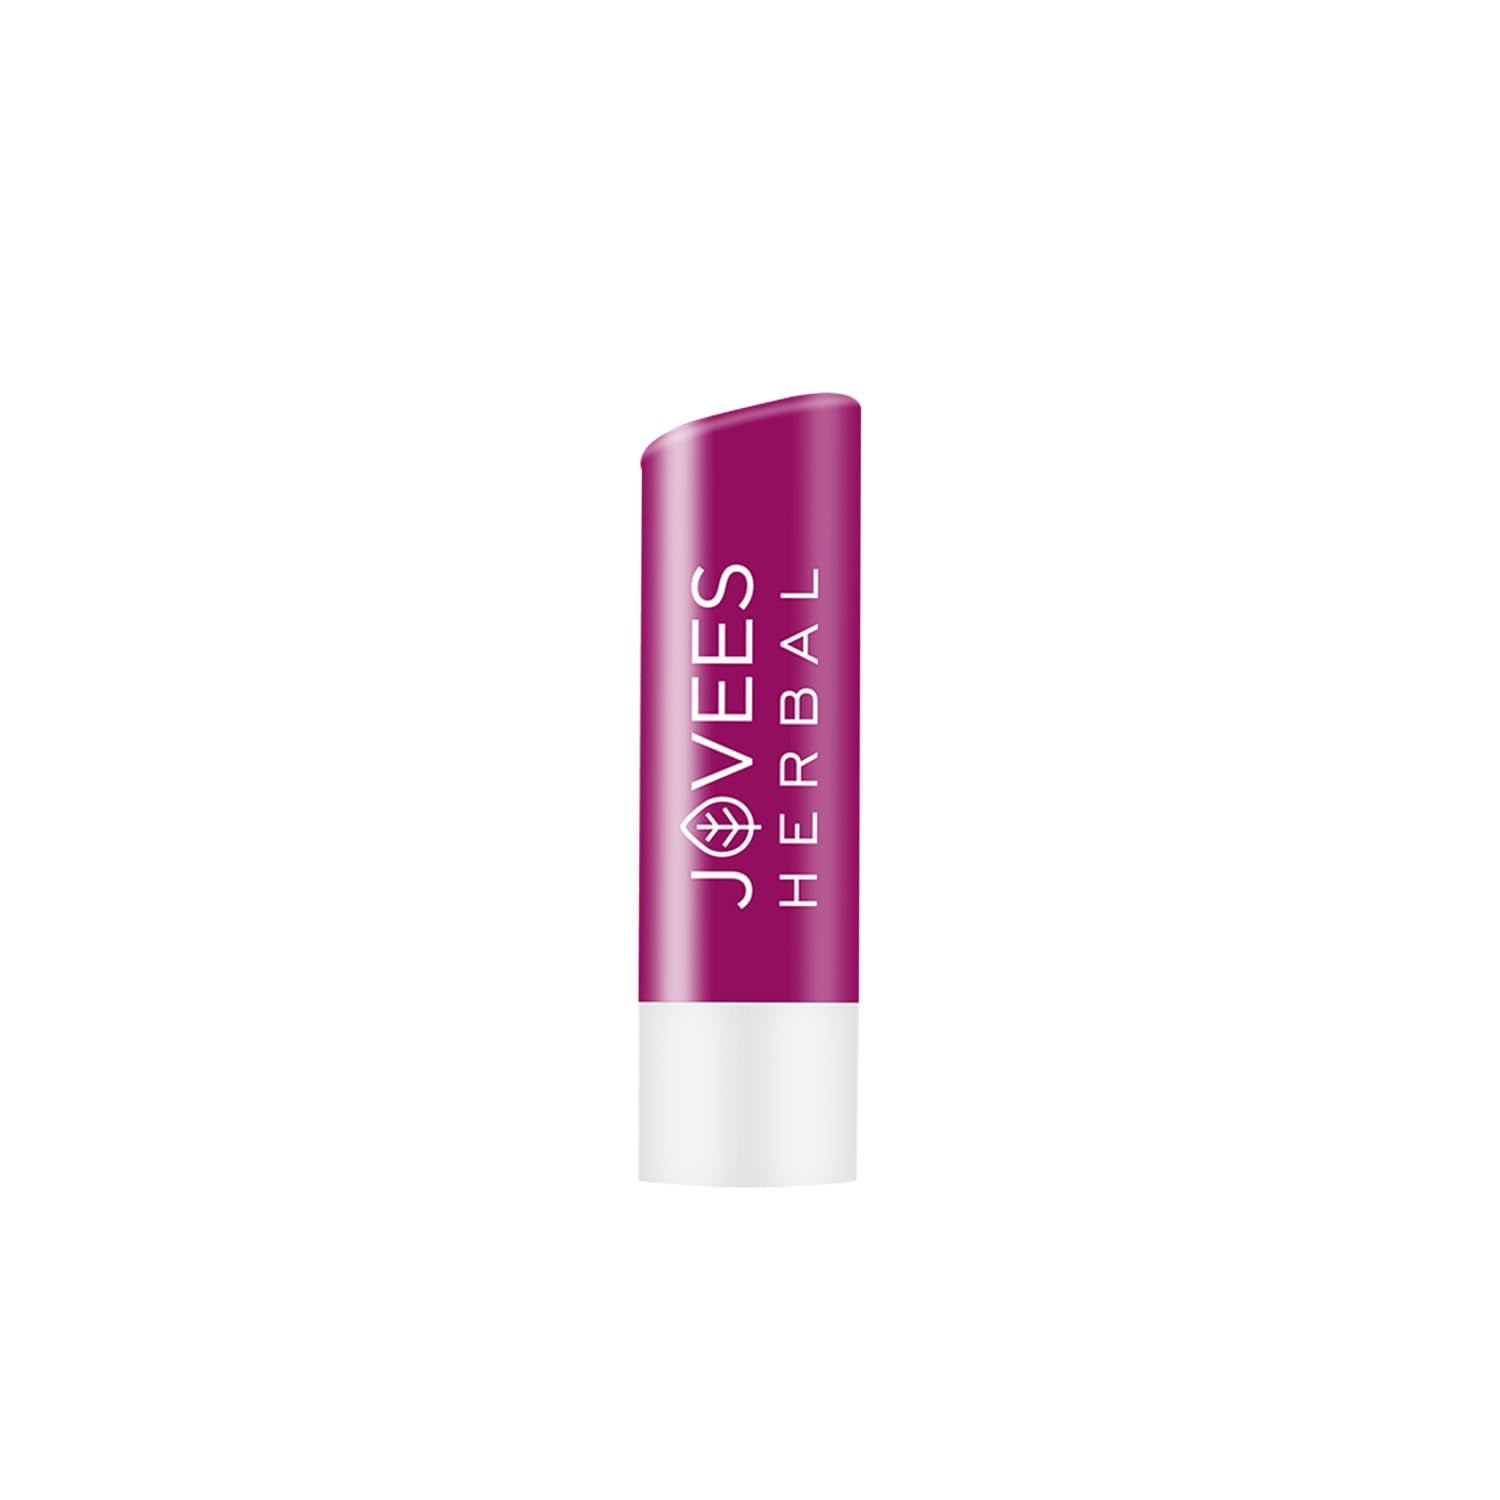 Jovees Herbal Berry Lip Balm with Hyaluronic Acid | 24 Hour Hydration | Rejuvenates Dry and Chapped Lips | Gives Soft & Supple Lips 5g  from JOVEES